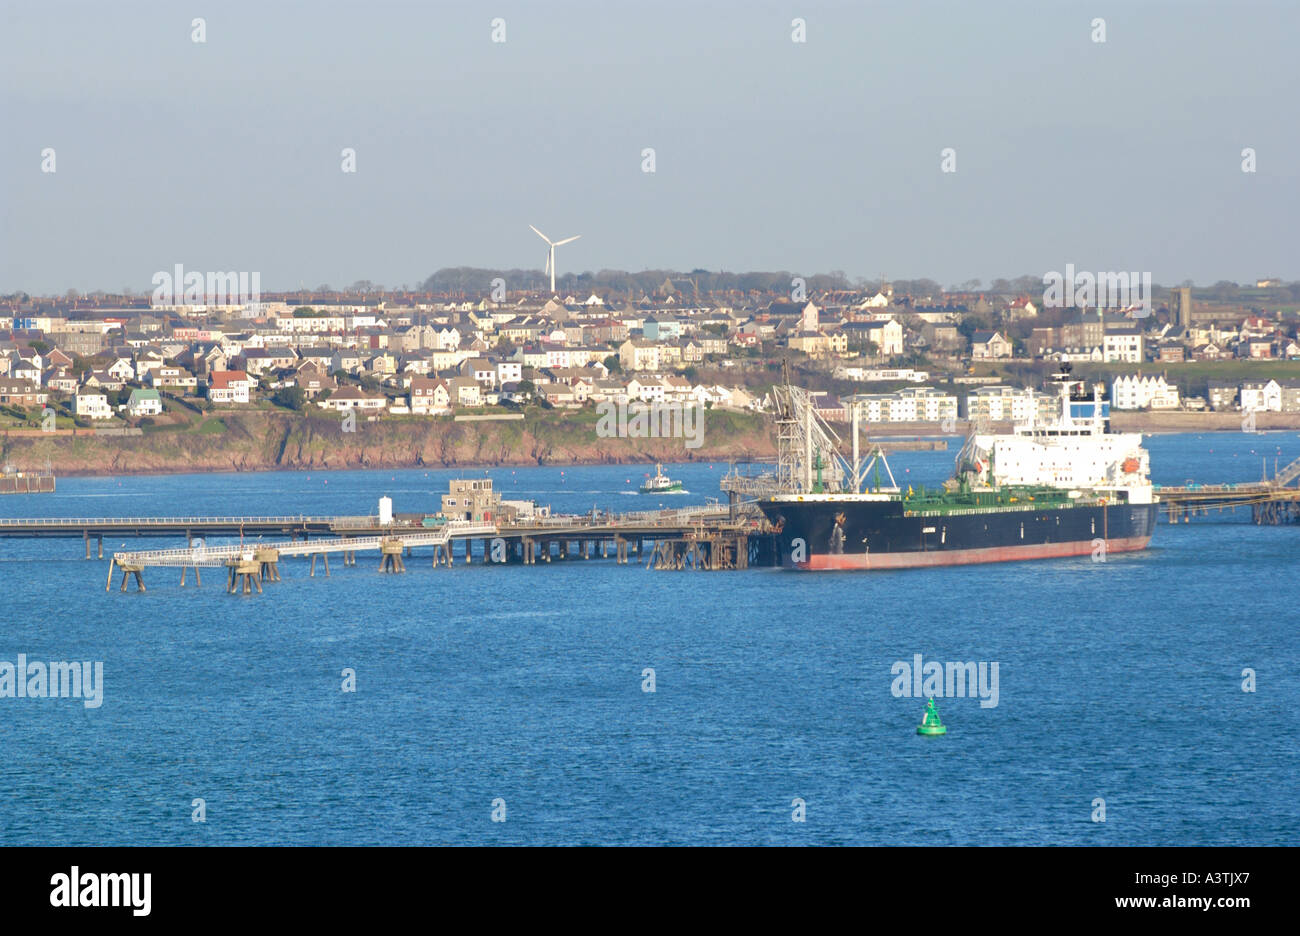 View over oil industry jetty with tanker looking towards the town of Milford Haven Pembrokeshire West Wales UK Stock Photo